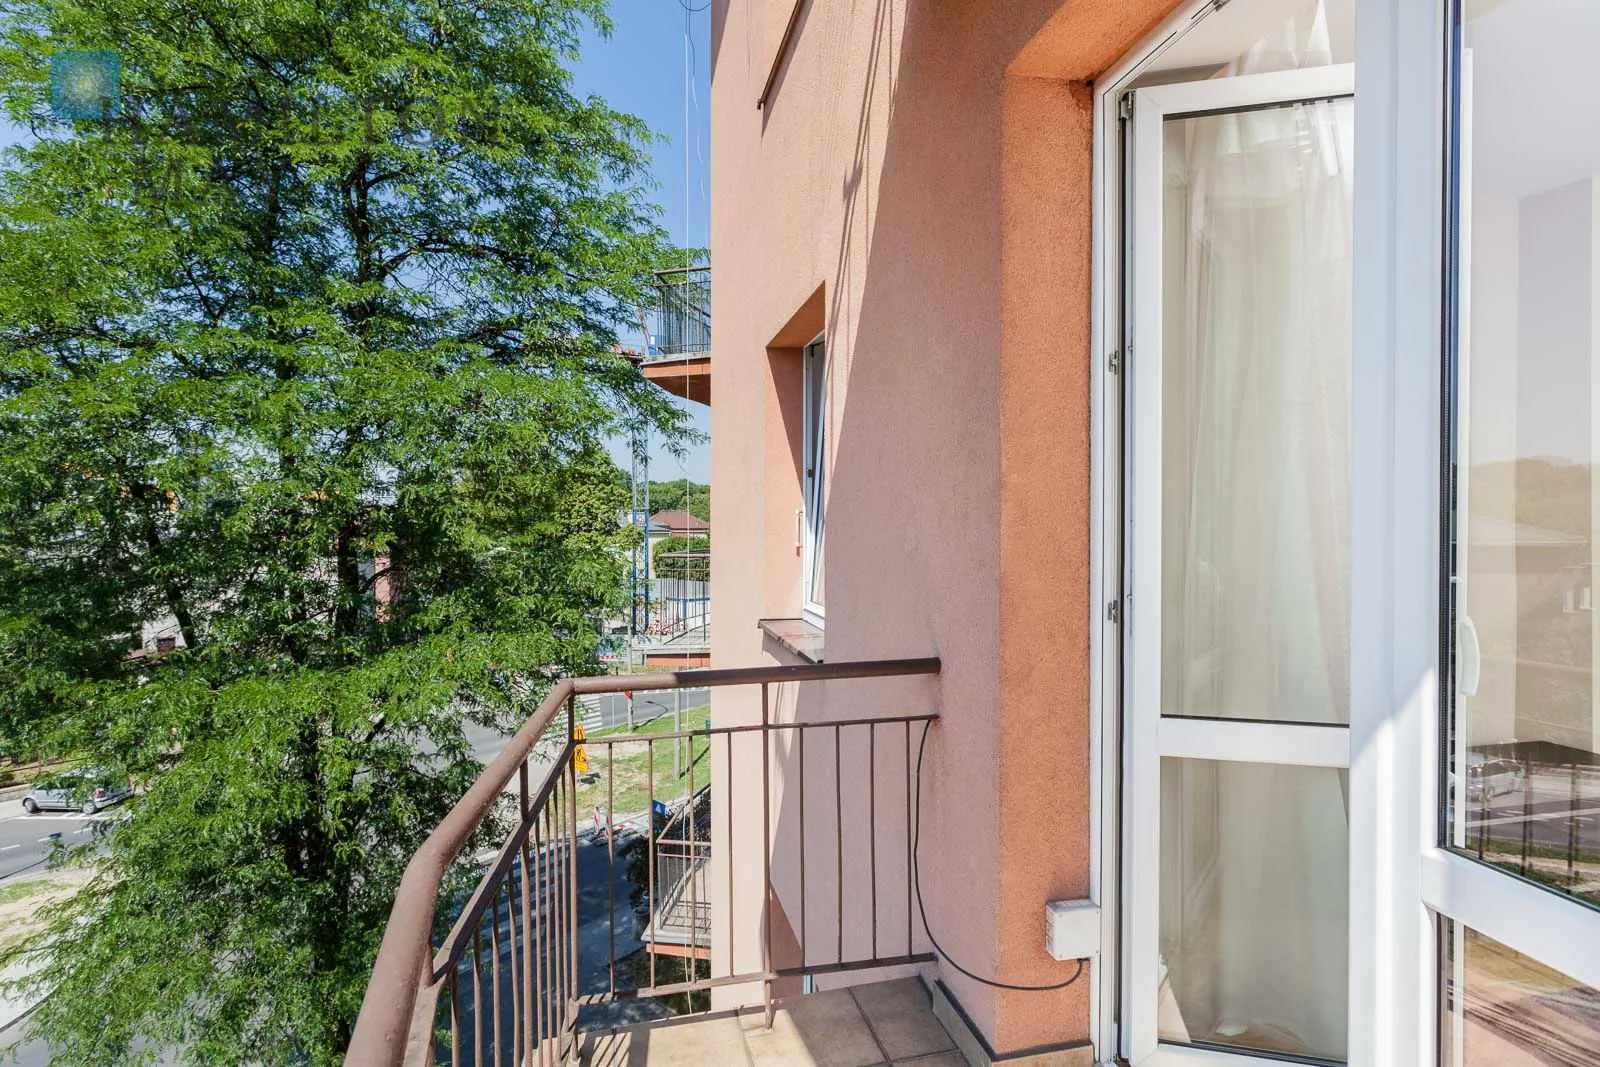 A cozy 2-room apartment with a balcony in the Olsza district

